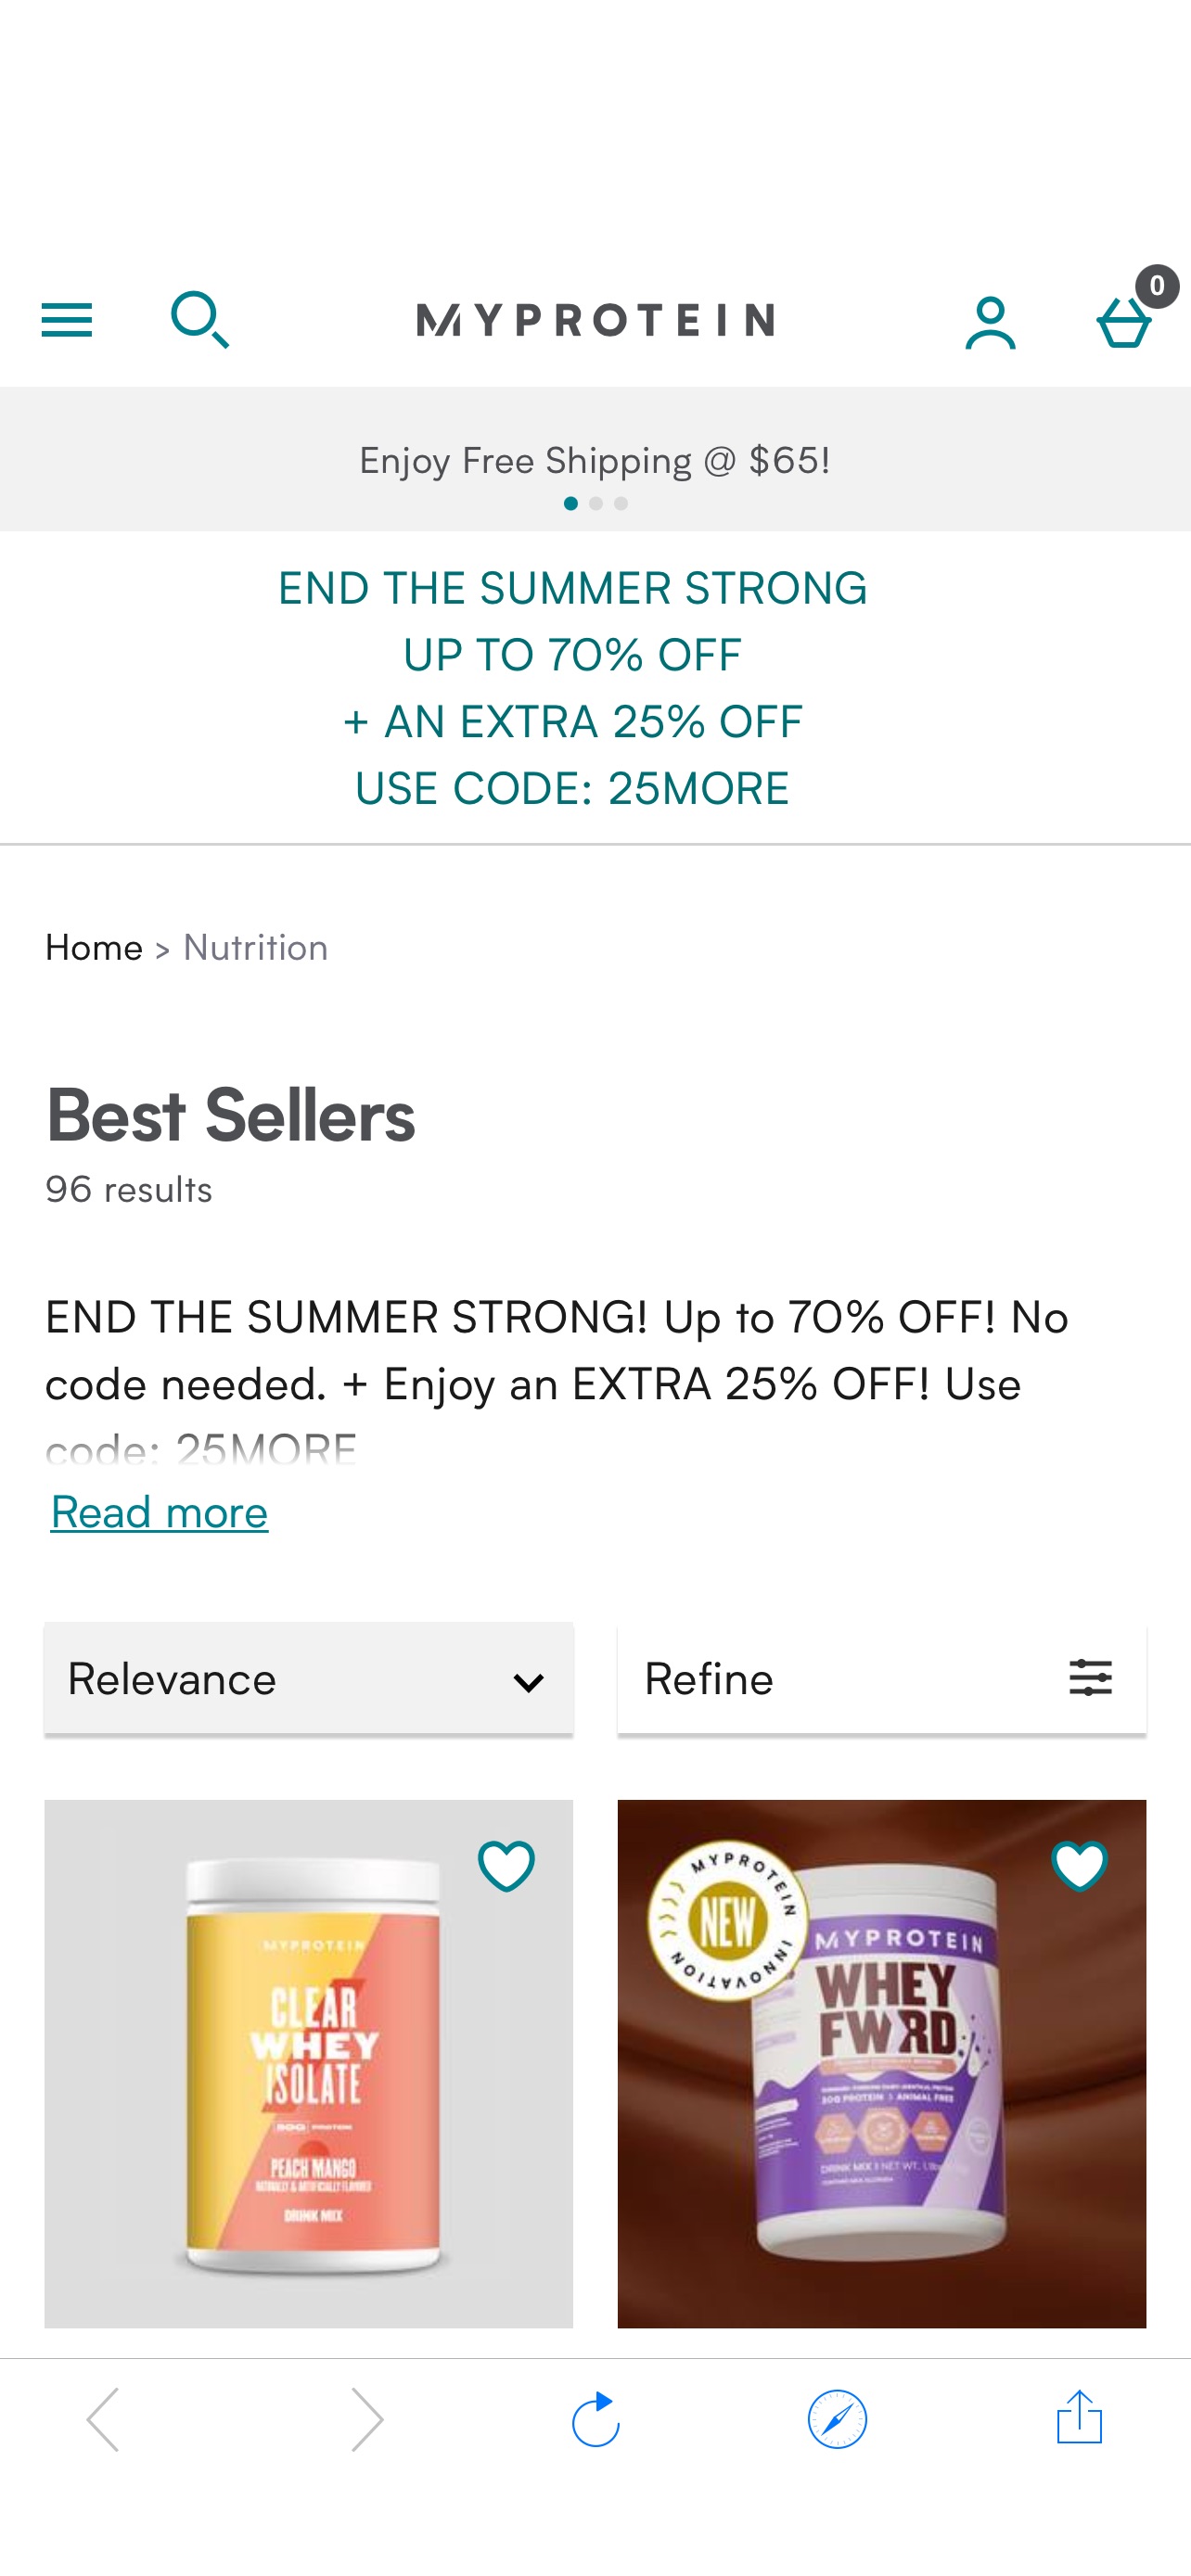 END THE SUMMER STRONG! Up to 70% OFF! No code needed. + Enjoy an EXTRA 25% OFF!